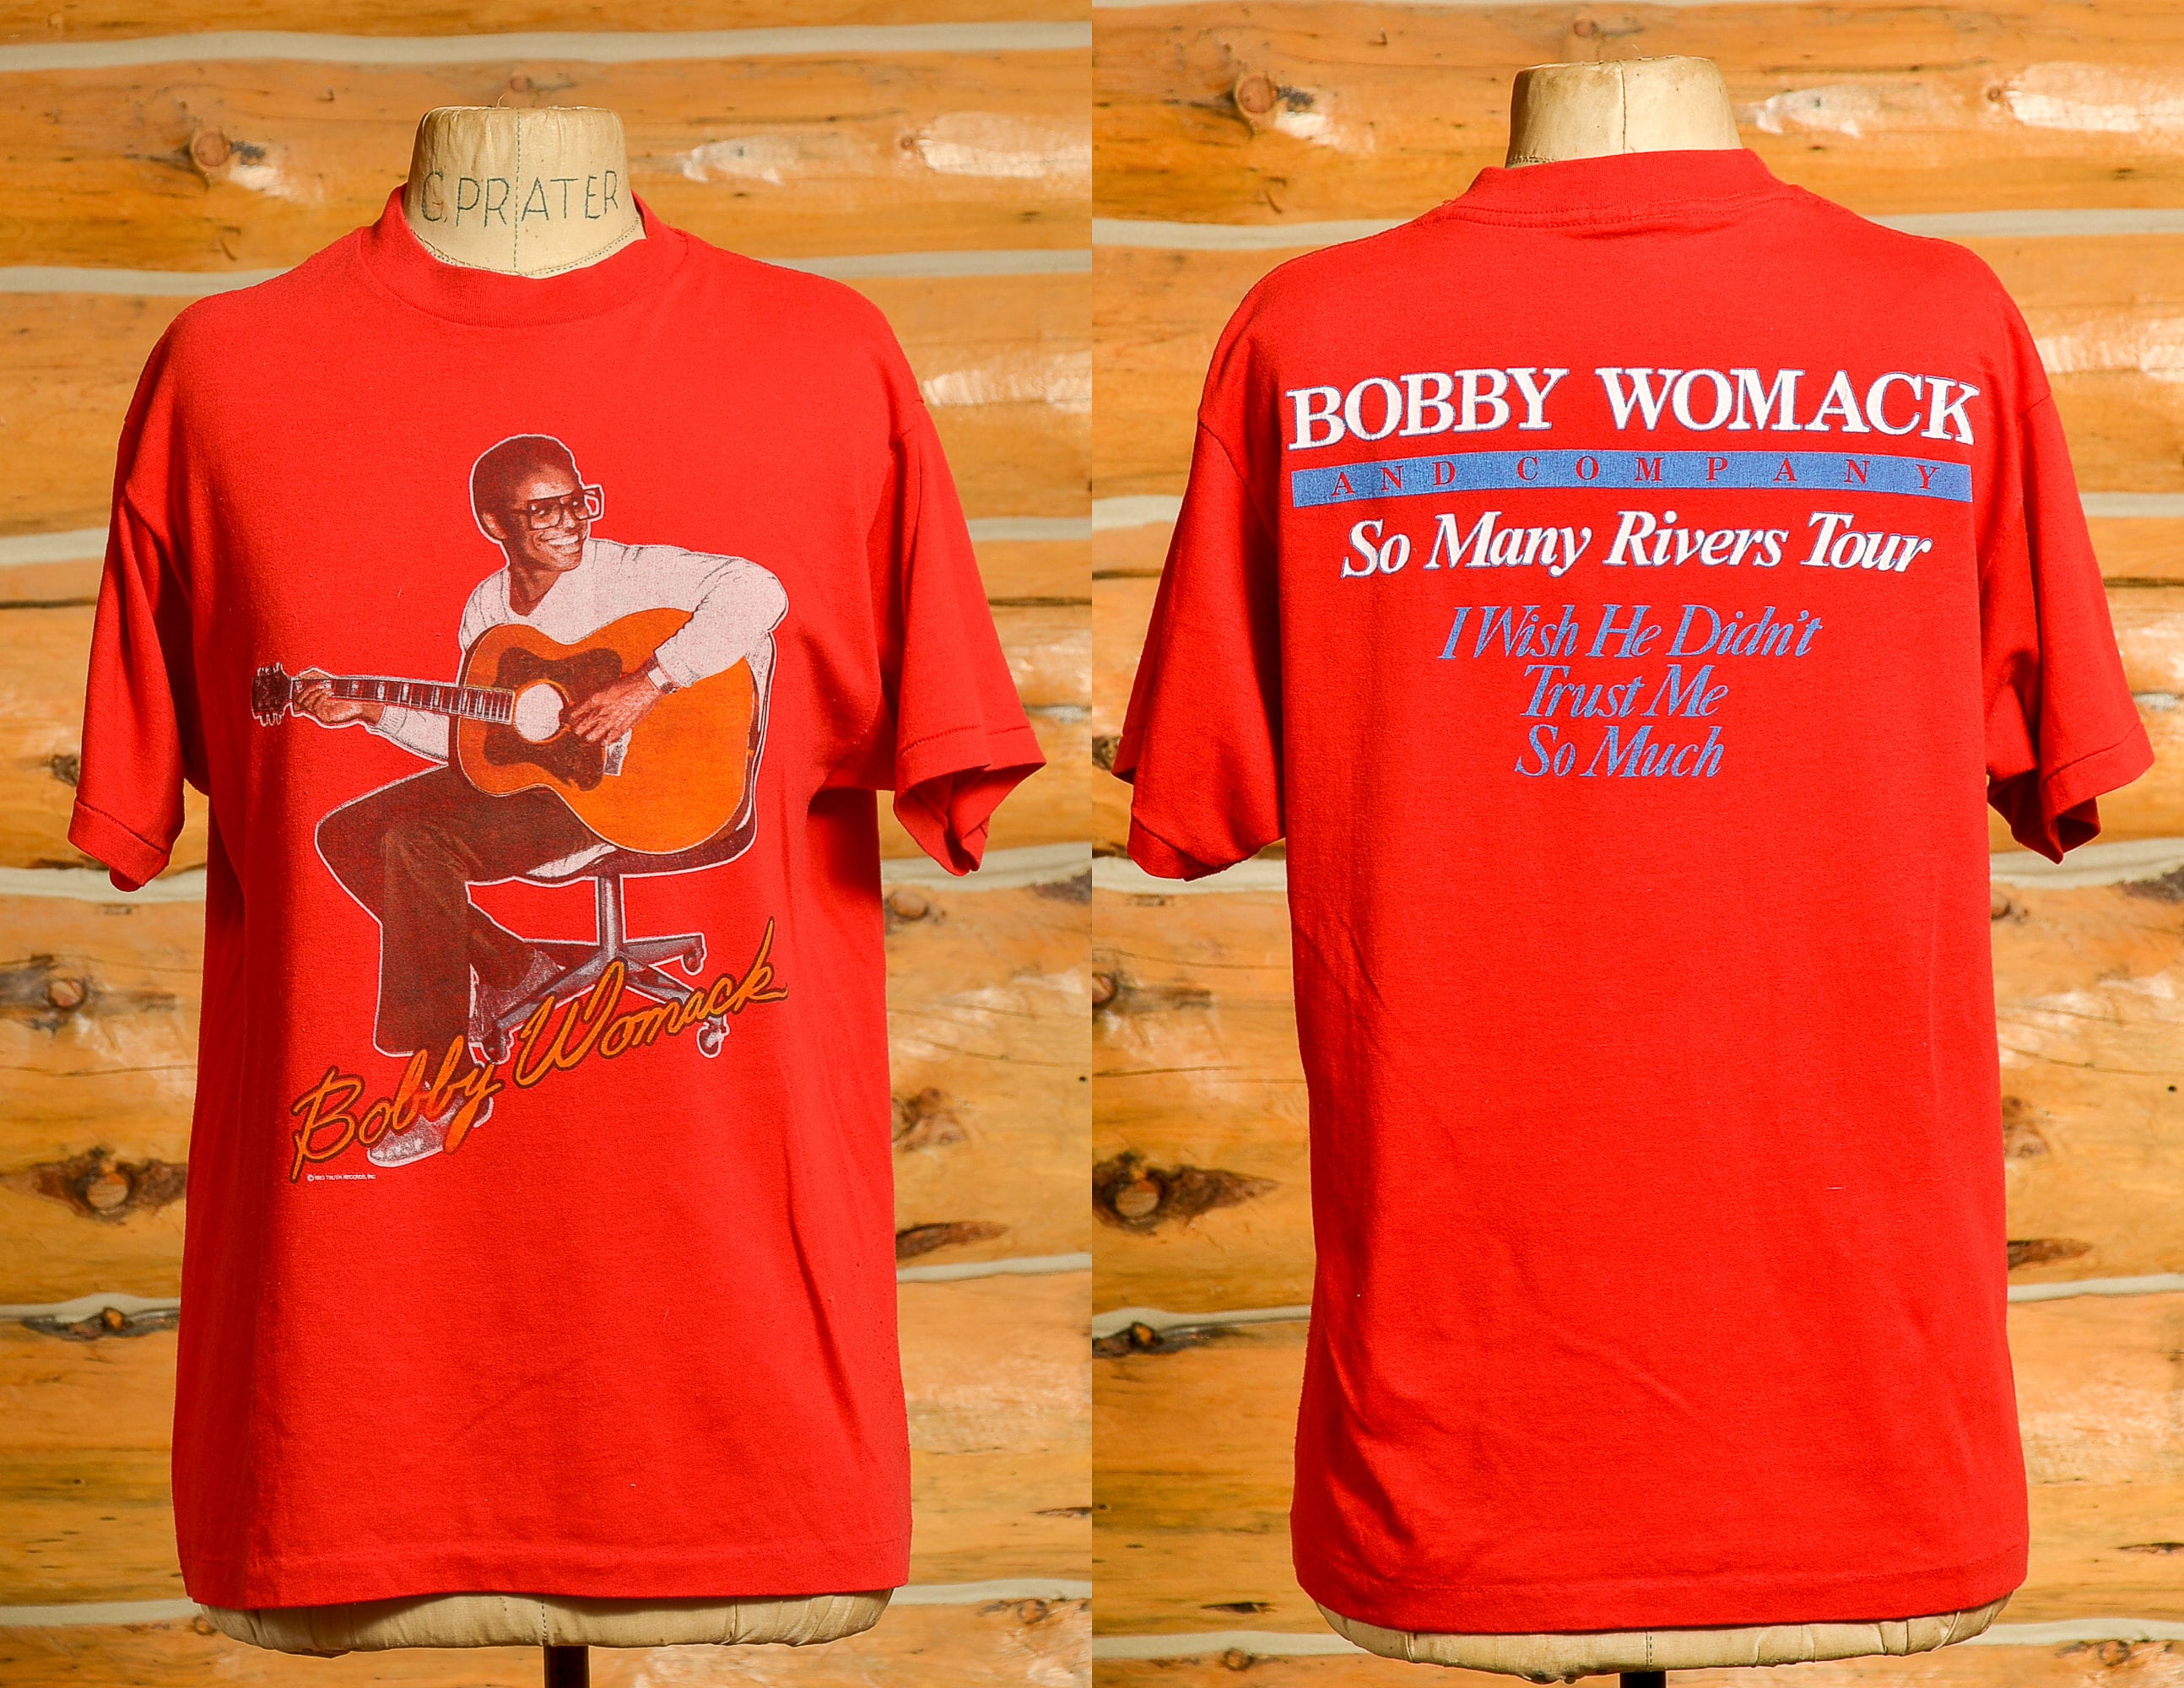 1985 Bobby Womack so Many Rivers Tour T Shirt R and B Soul